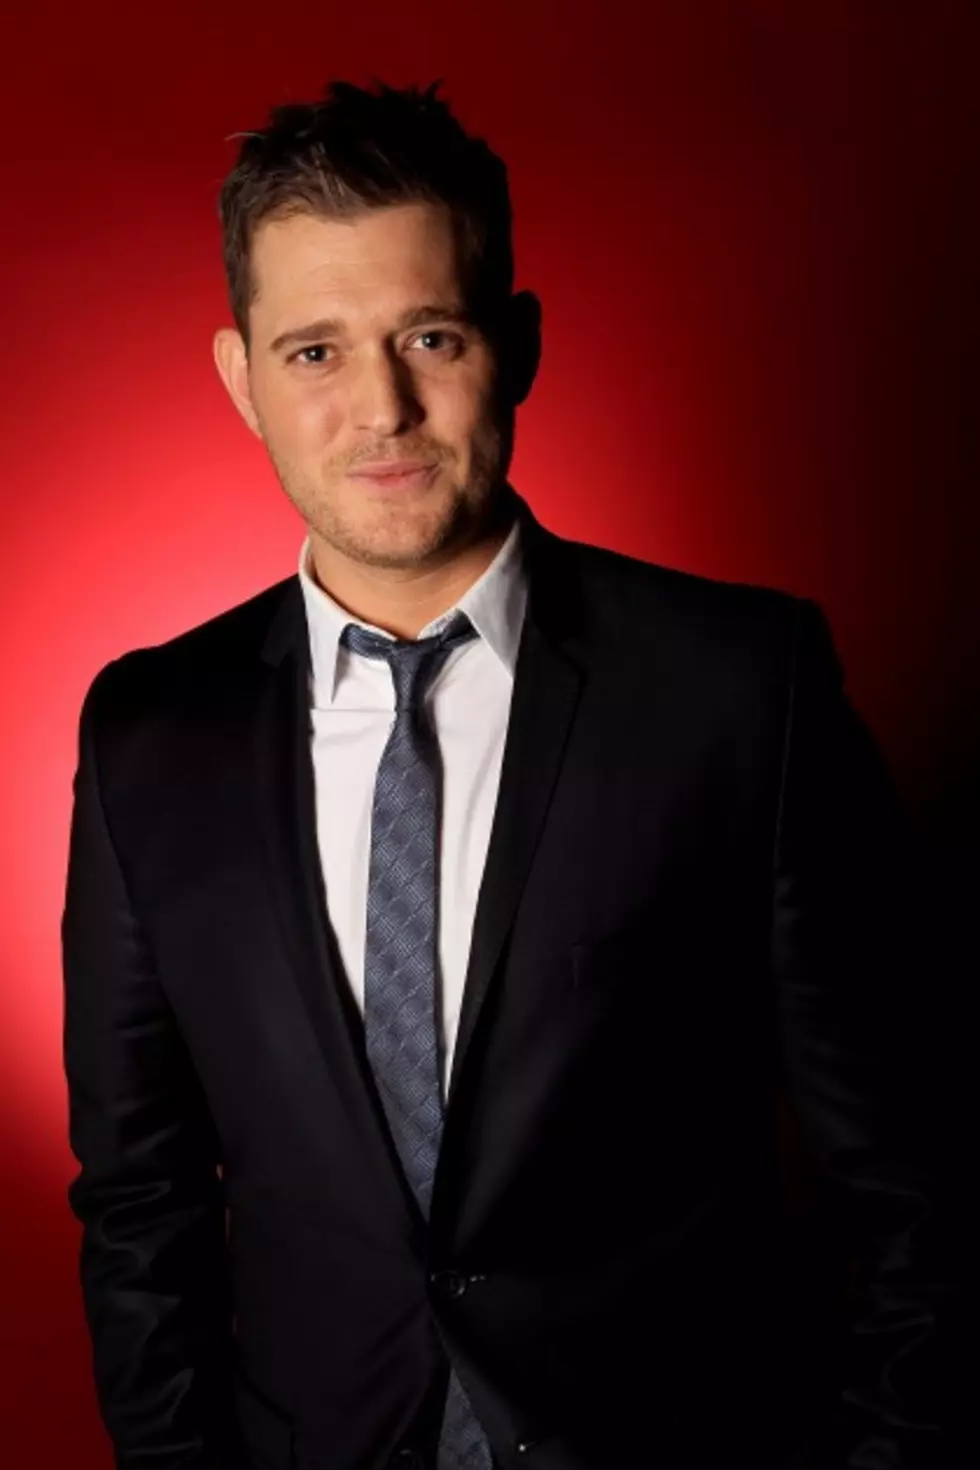 Limited Number Of Exclusive Michael Buble VIP Seats For Sale Thursday Morning!